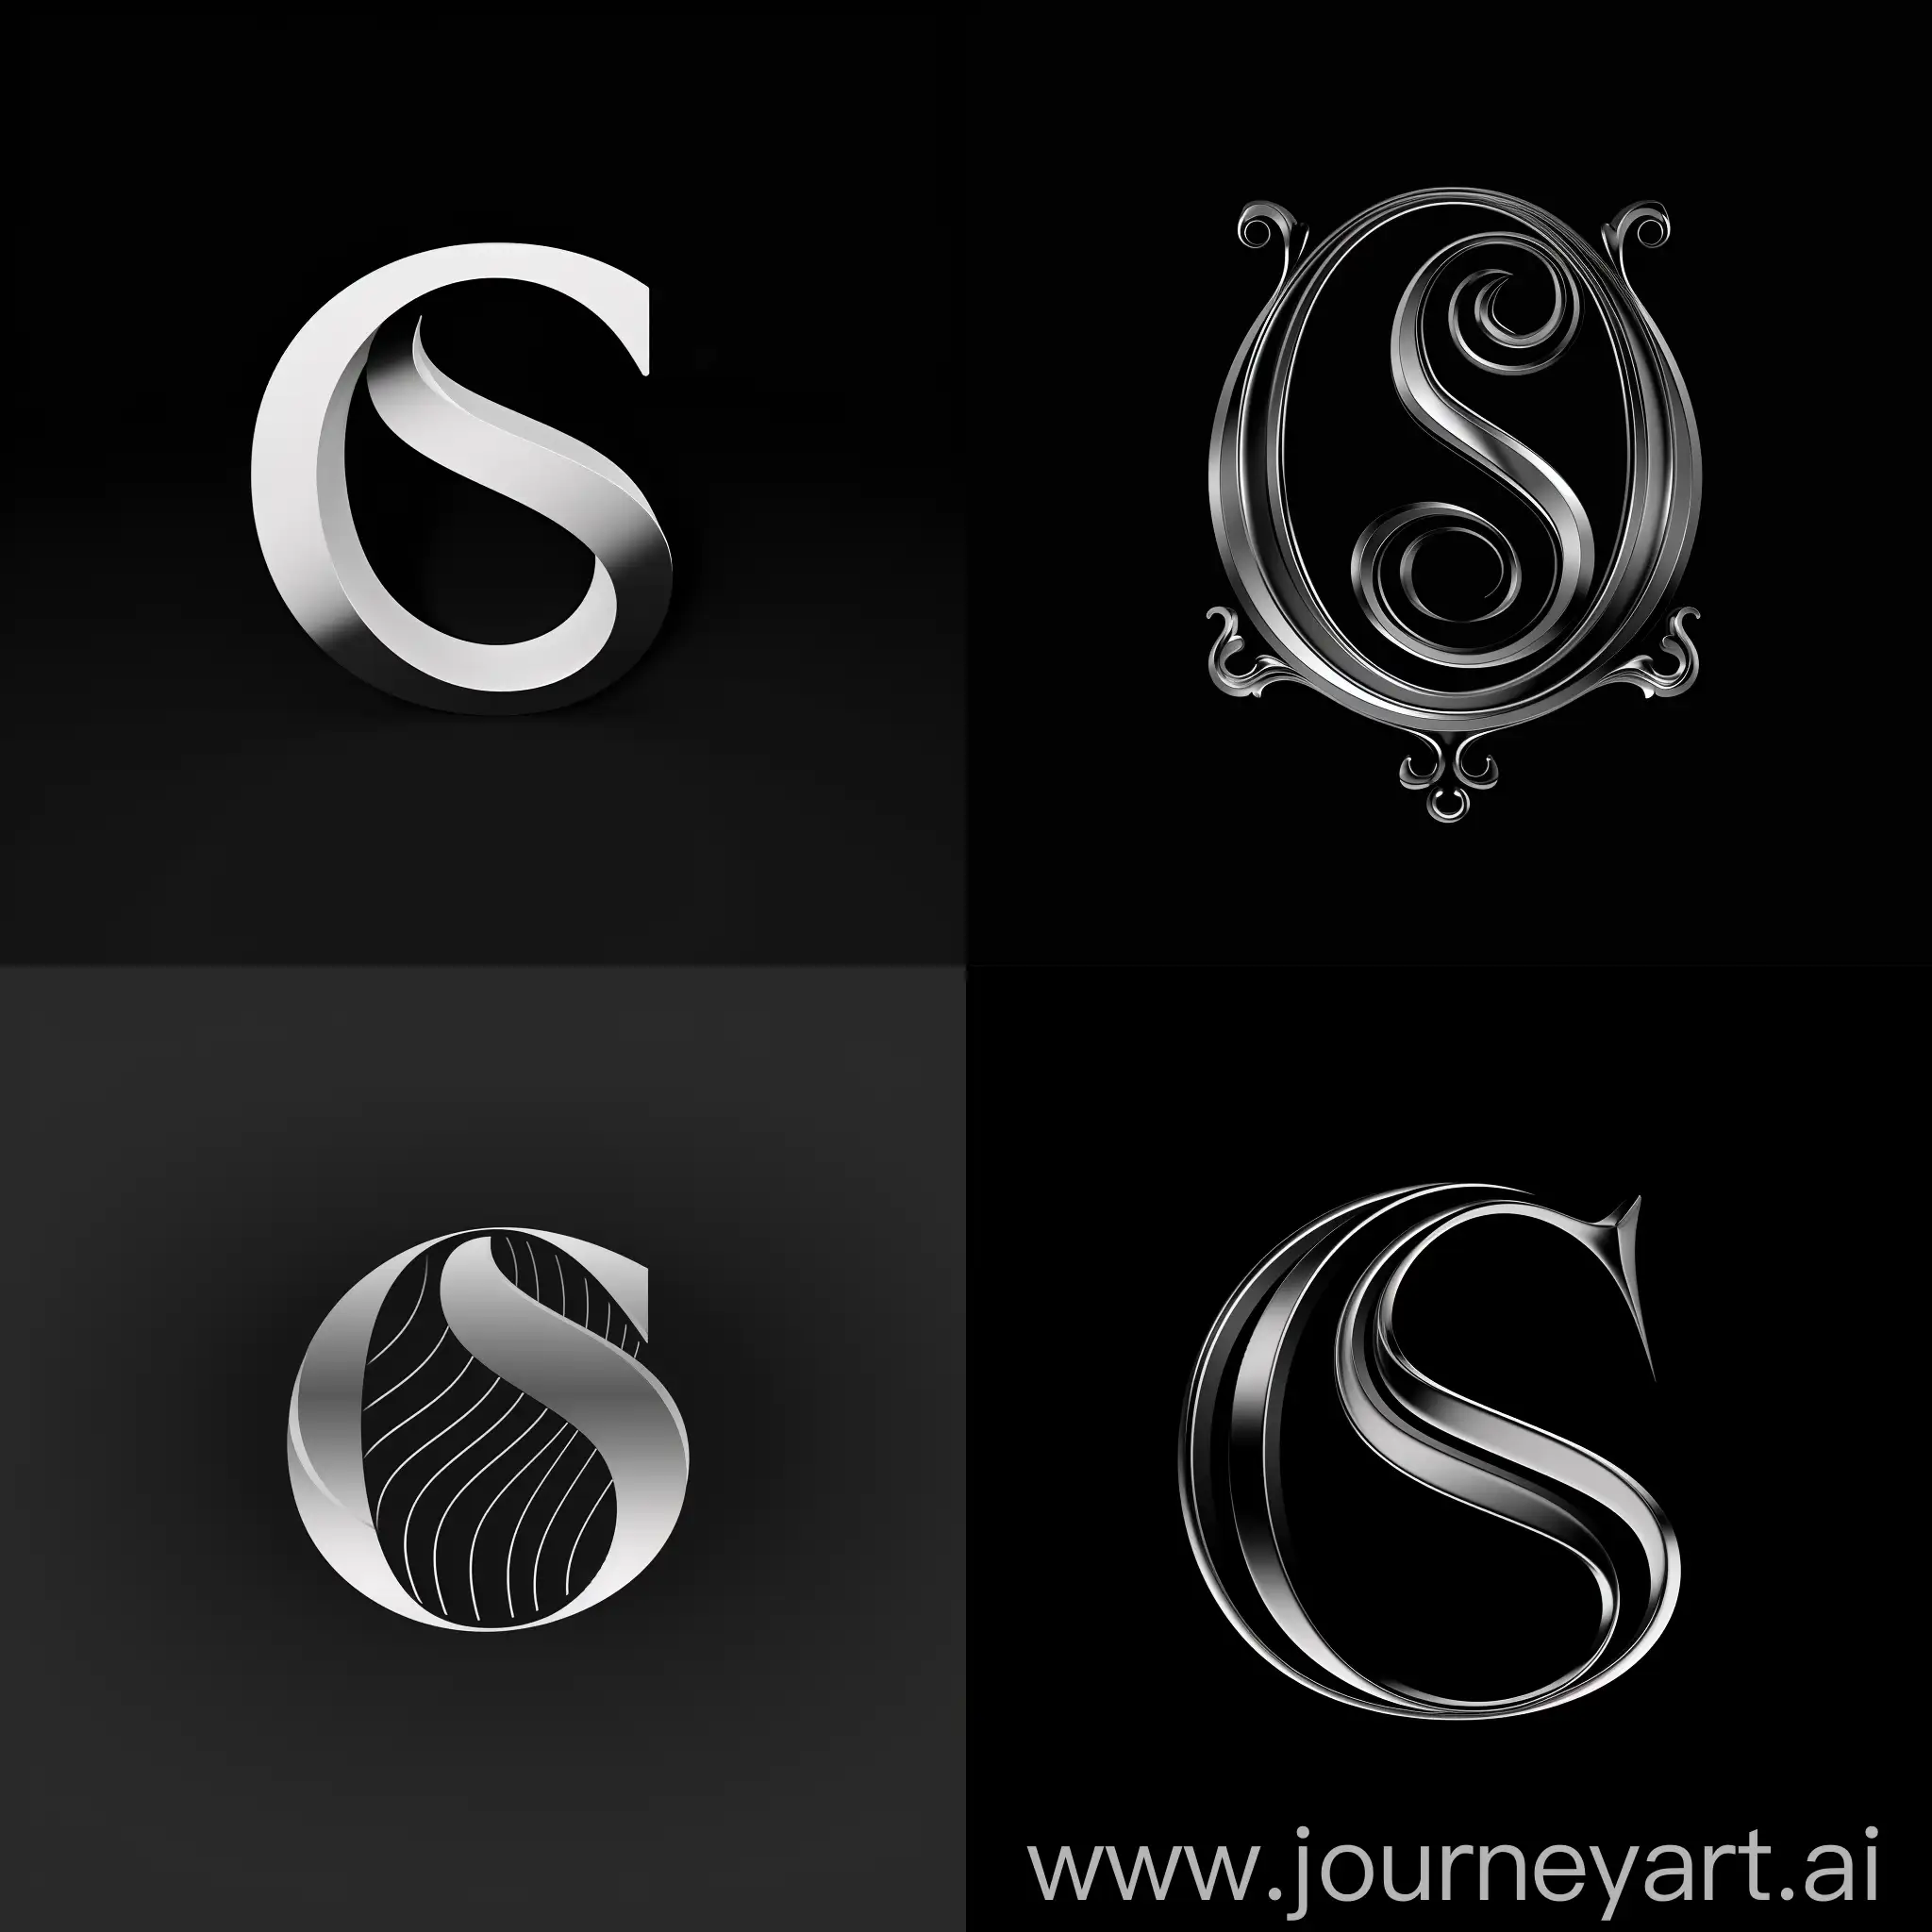 Luxurious-Black-and-White-Software-Logo-Incorporating-O-and-S